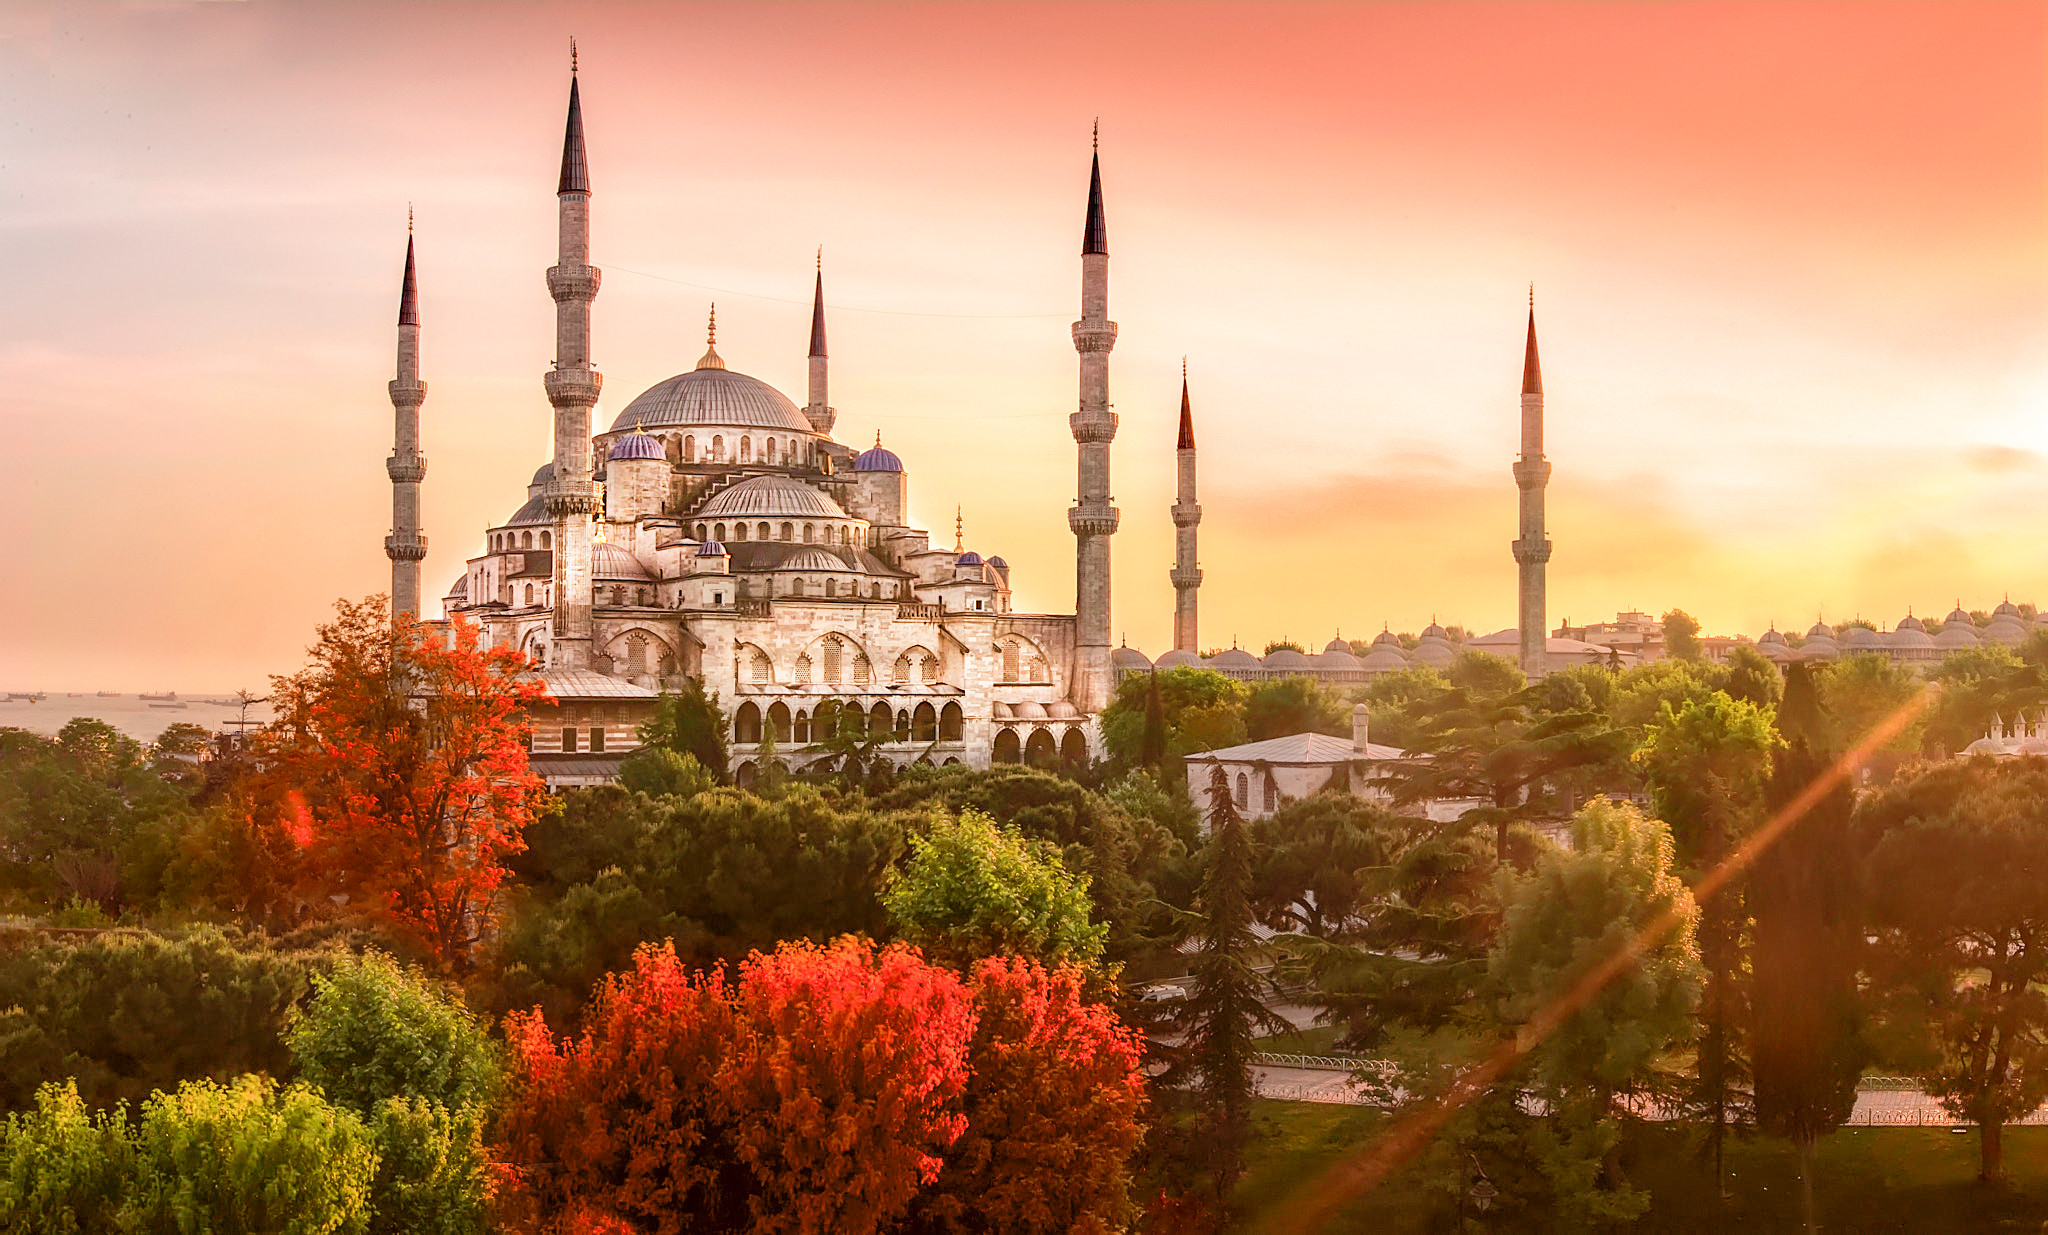 2048x1235, Blue Mosque Istanbul, Turkey 4k Wallpapers2 - Sultan Ahmed Mosque - HD Wallpaper 